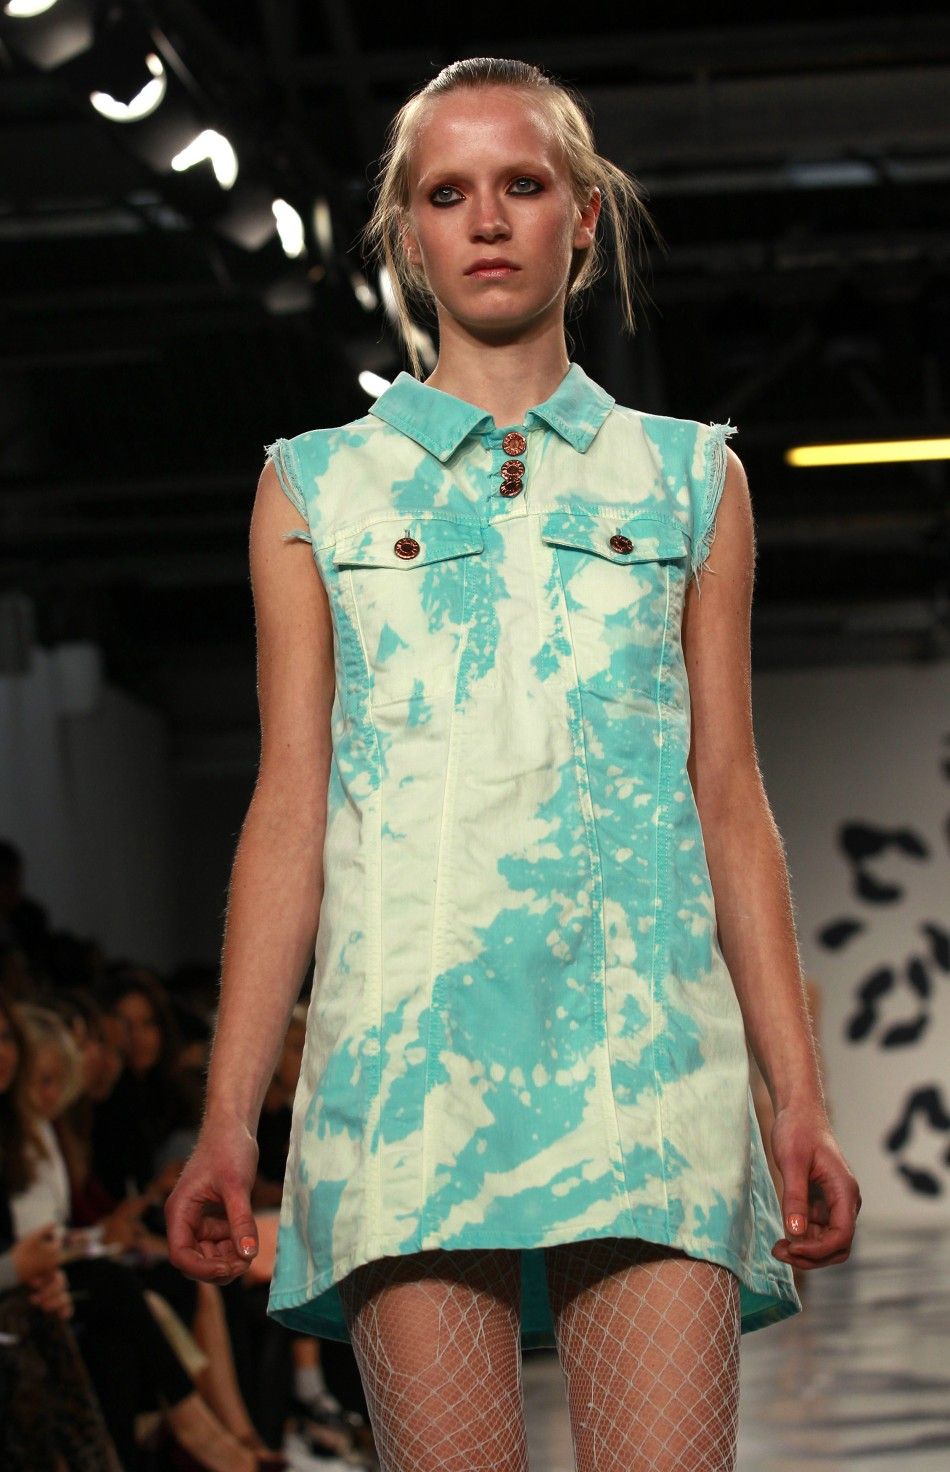 A model presents a creation at the House of Holland 2012 SpringSummer collection during London Fashion Week